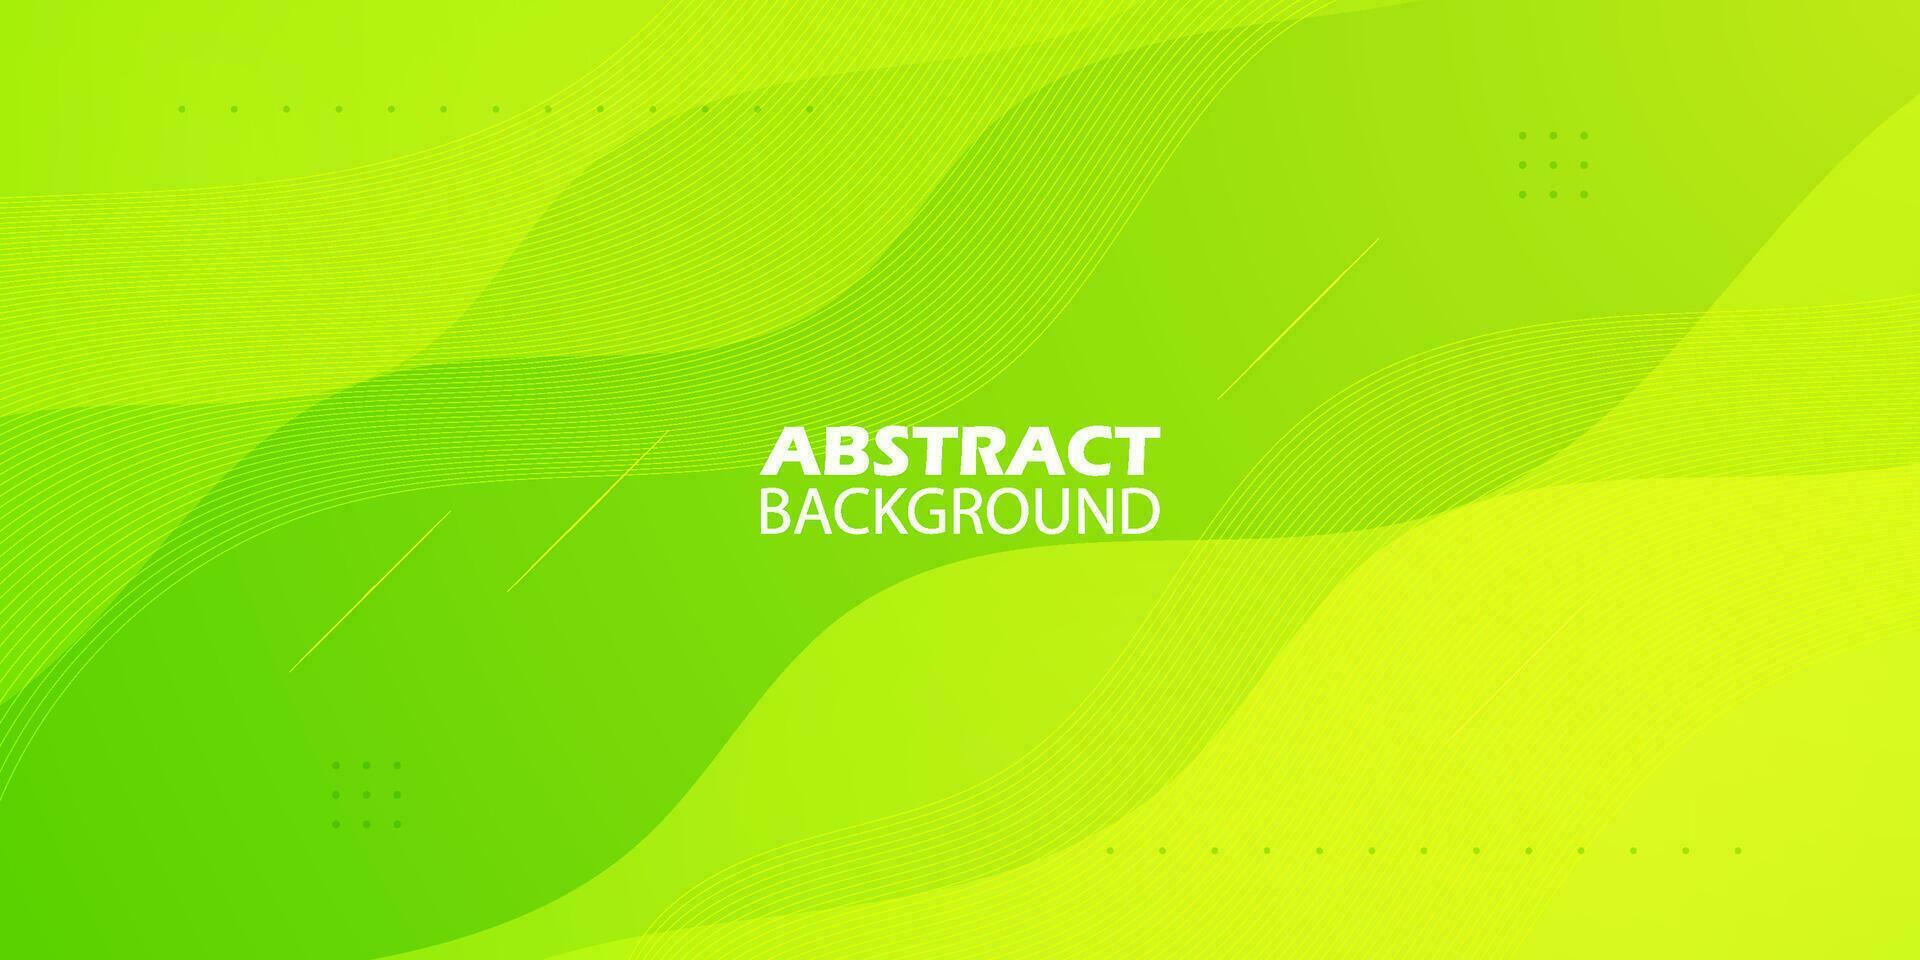 Bright green wave background with simple shape and lines pattern. Colorful simple green design. Simple geometric shapes concept. Eps10 vector